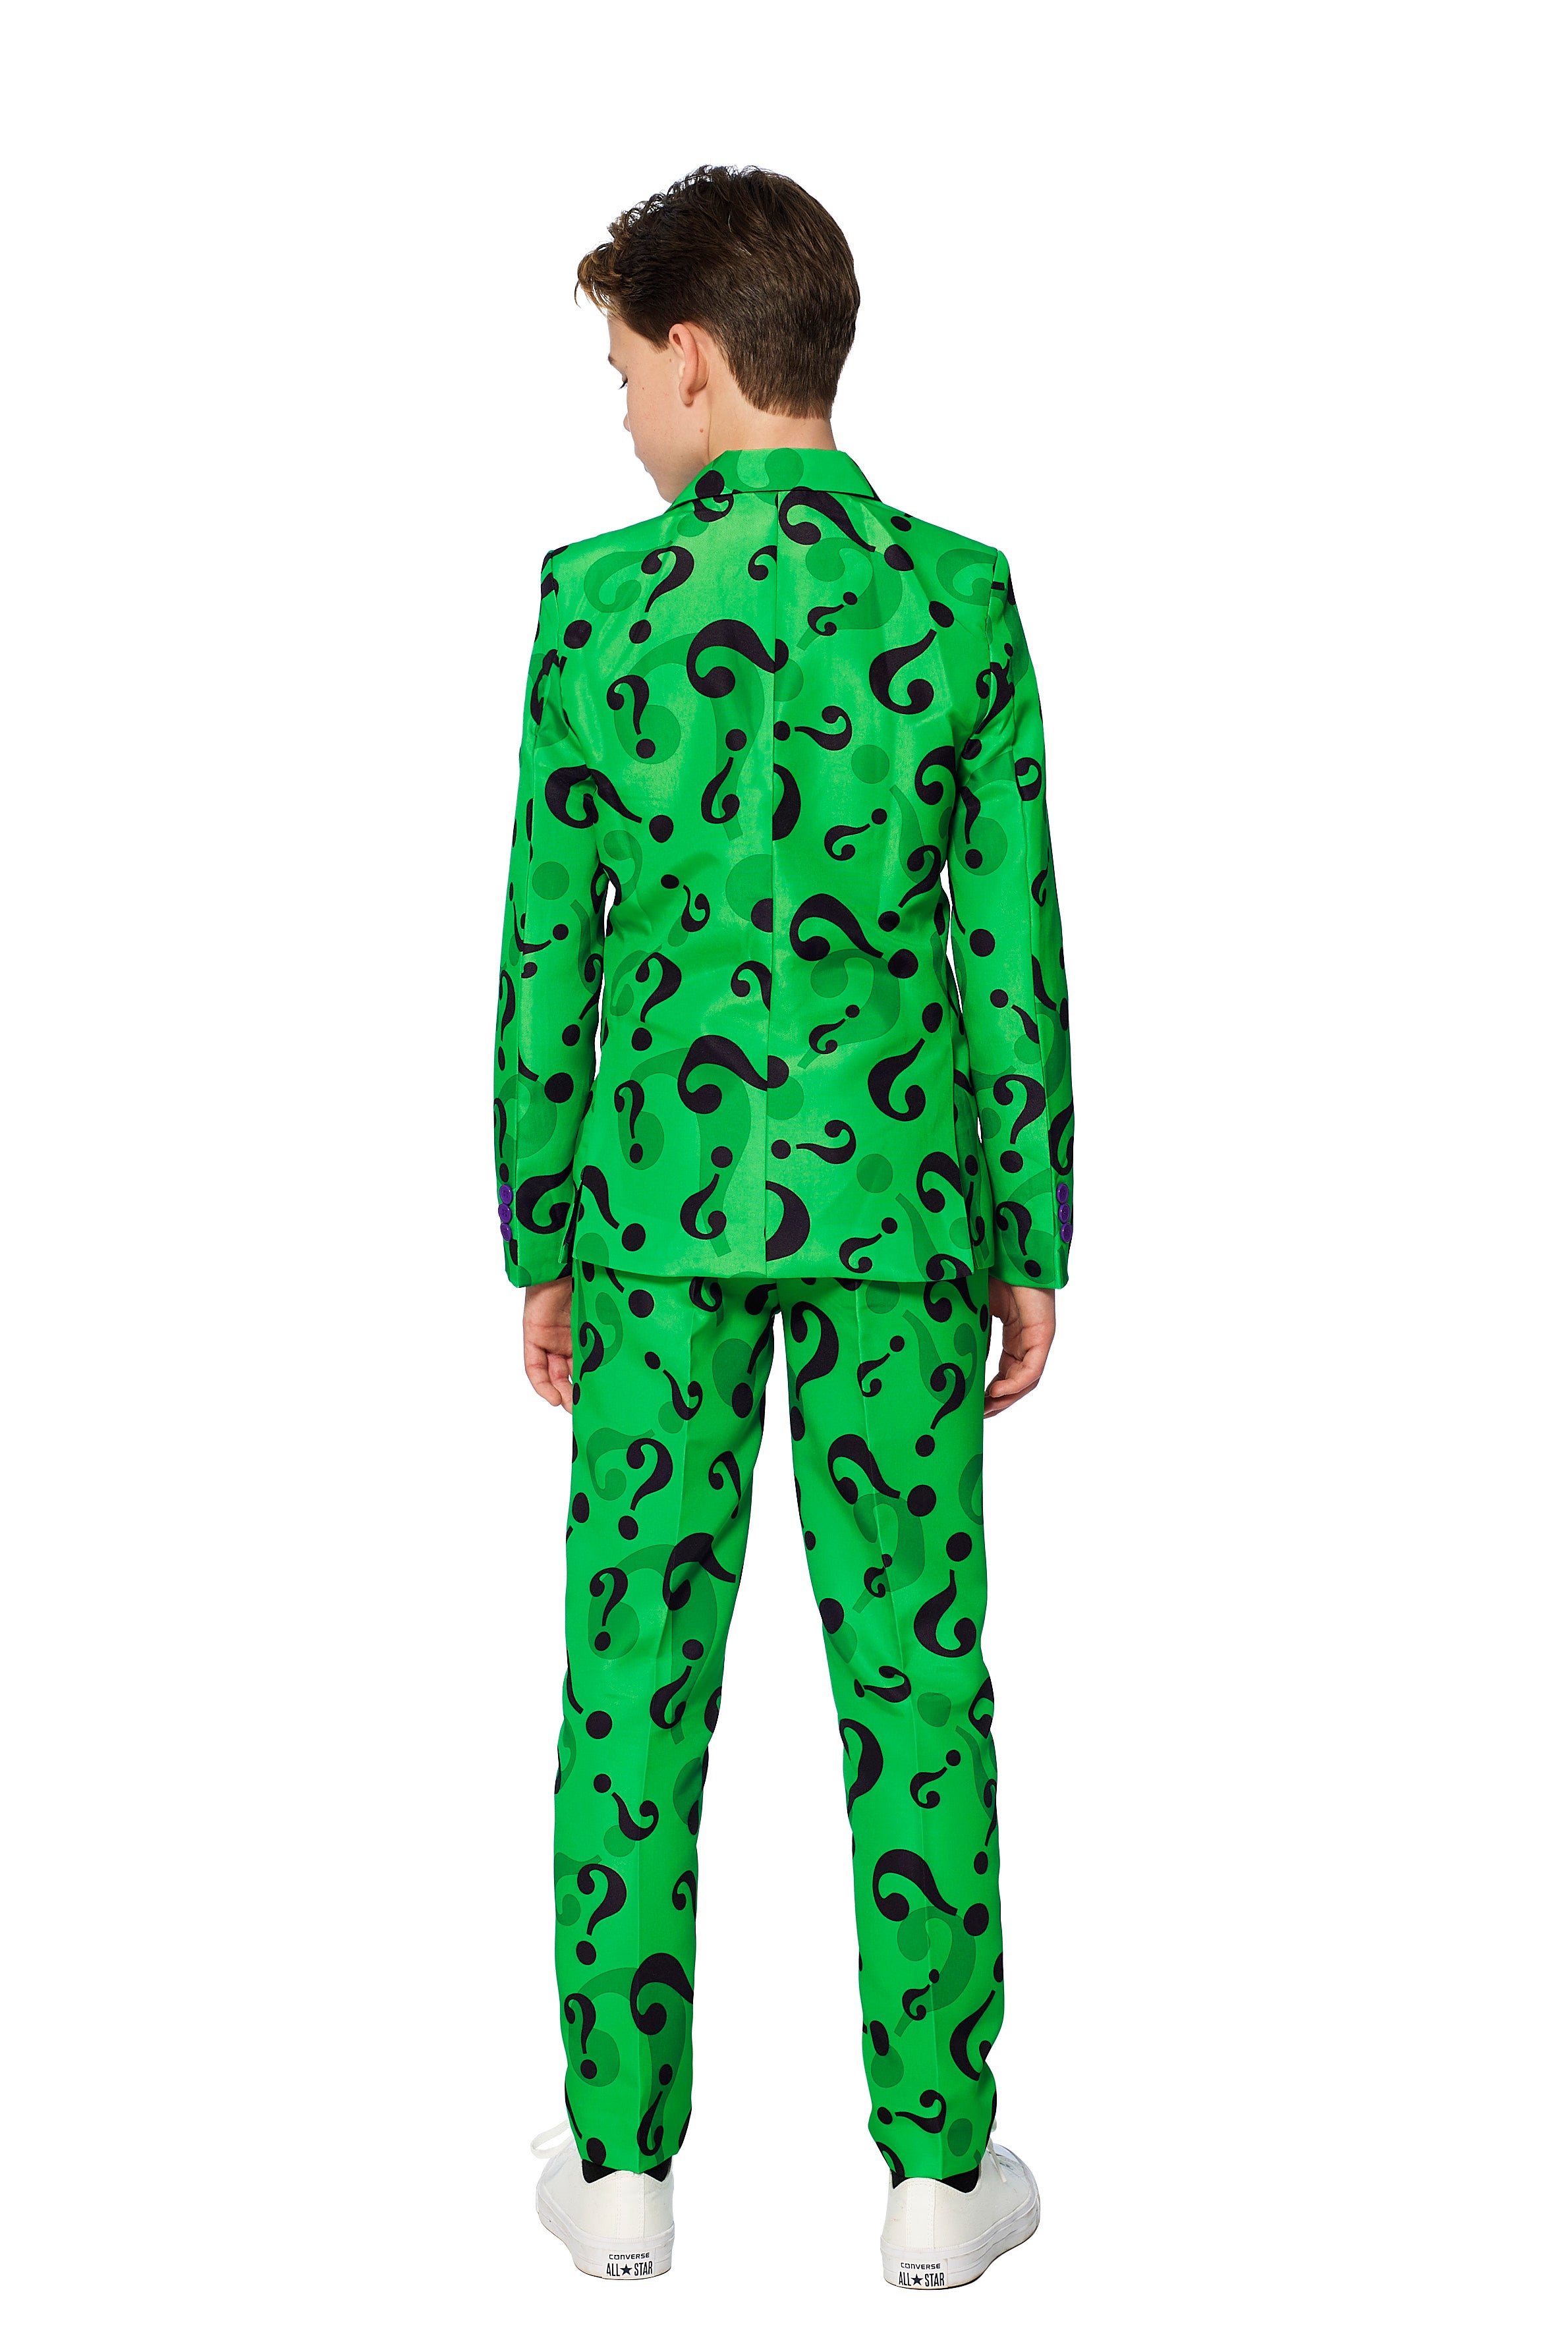 Costume Suitmeister BOYS The Riddler